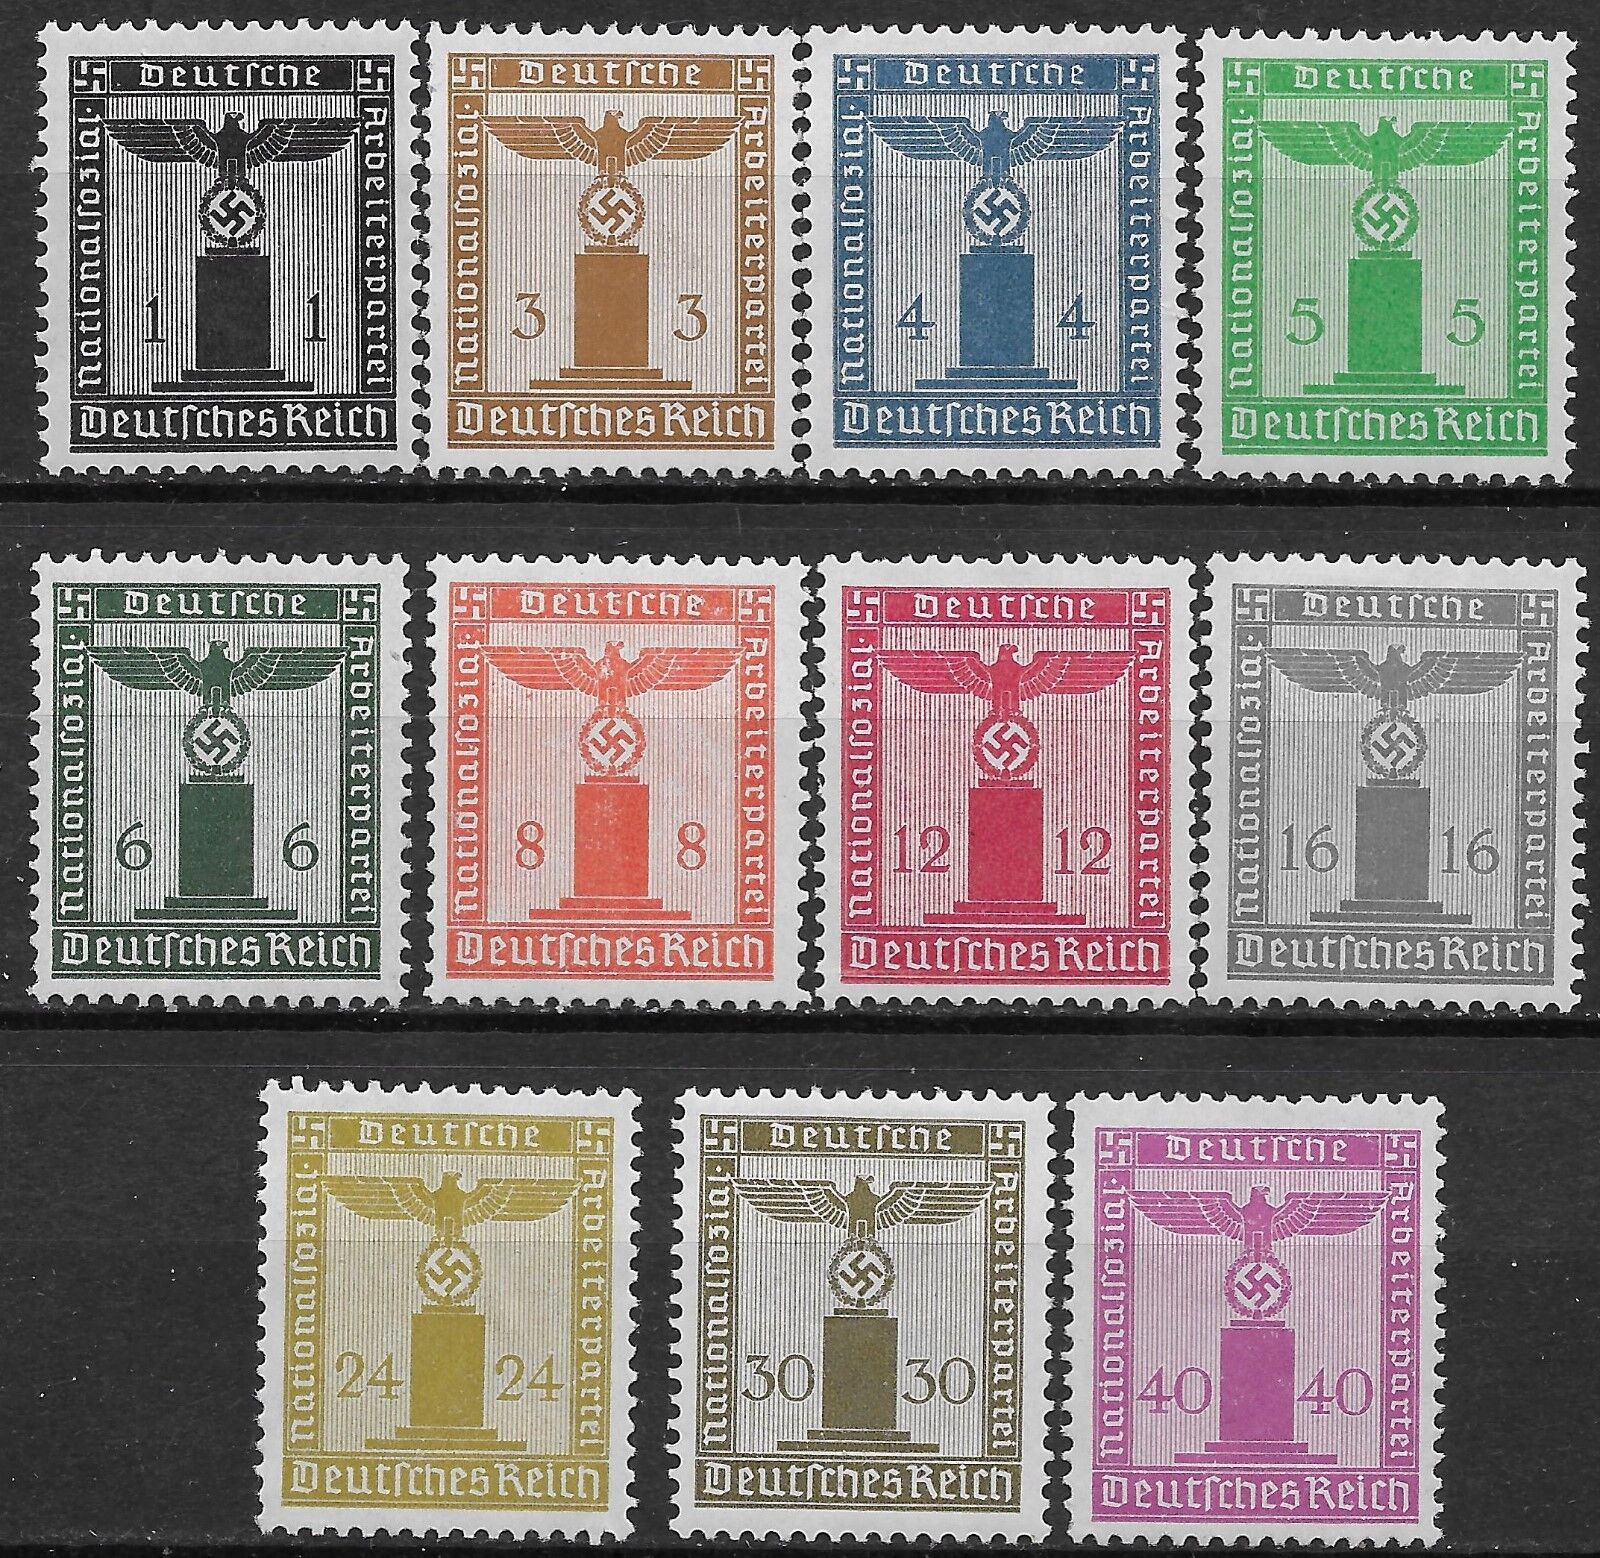 Germany 3rd Reich Mi# 144-154 Official Stamps Issued 1938 MH * Без бренда